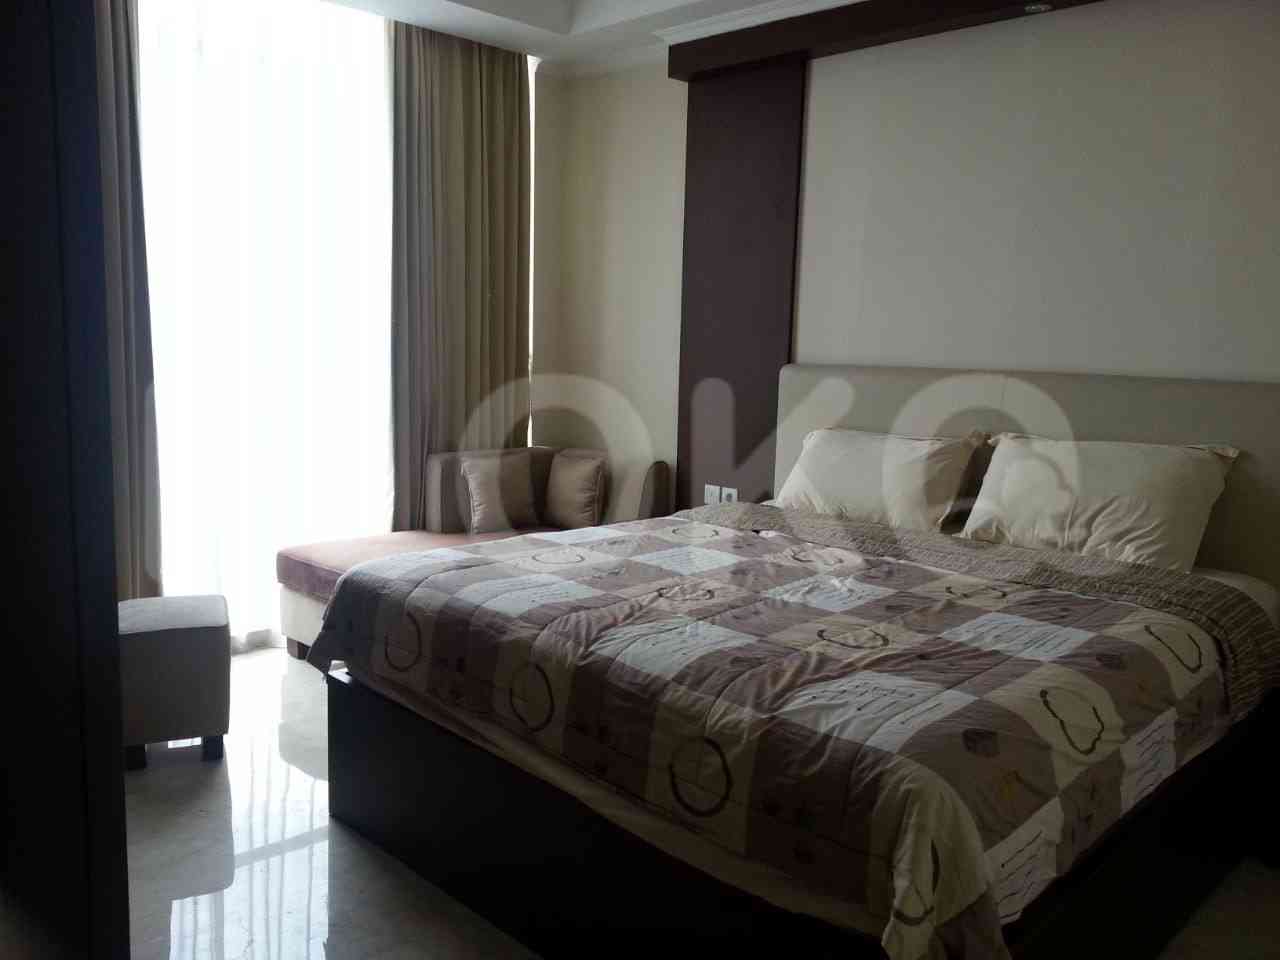 3 Bedroom on 8th Floor for Rent in Bellagio Residence - fkuffb 3